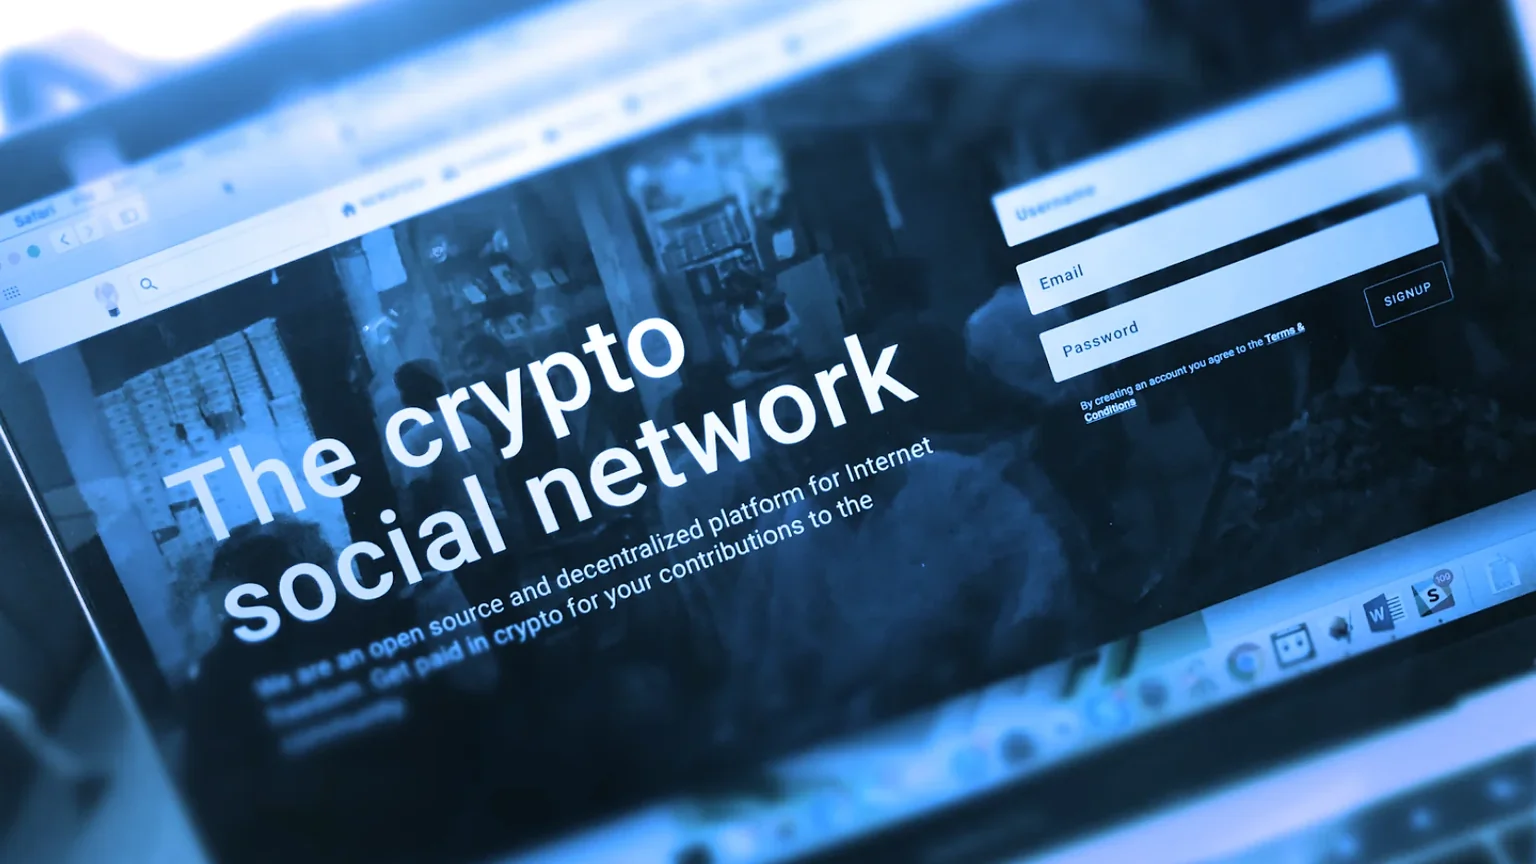 Crypto social network Minds aims to become fully decentralized. Image: Minds